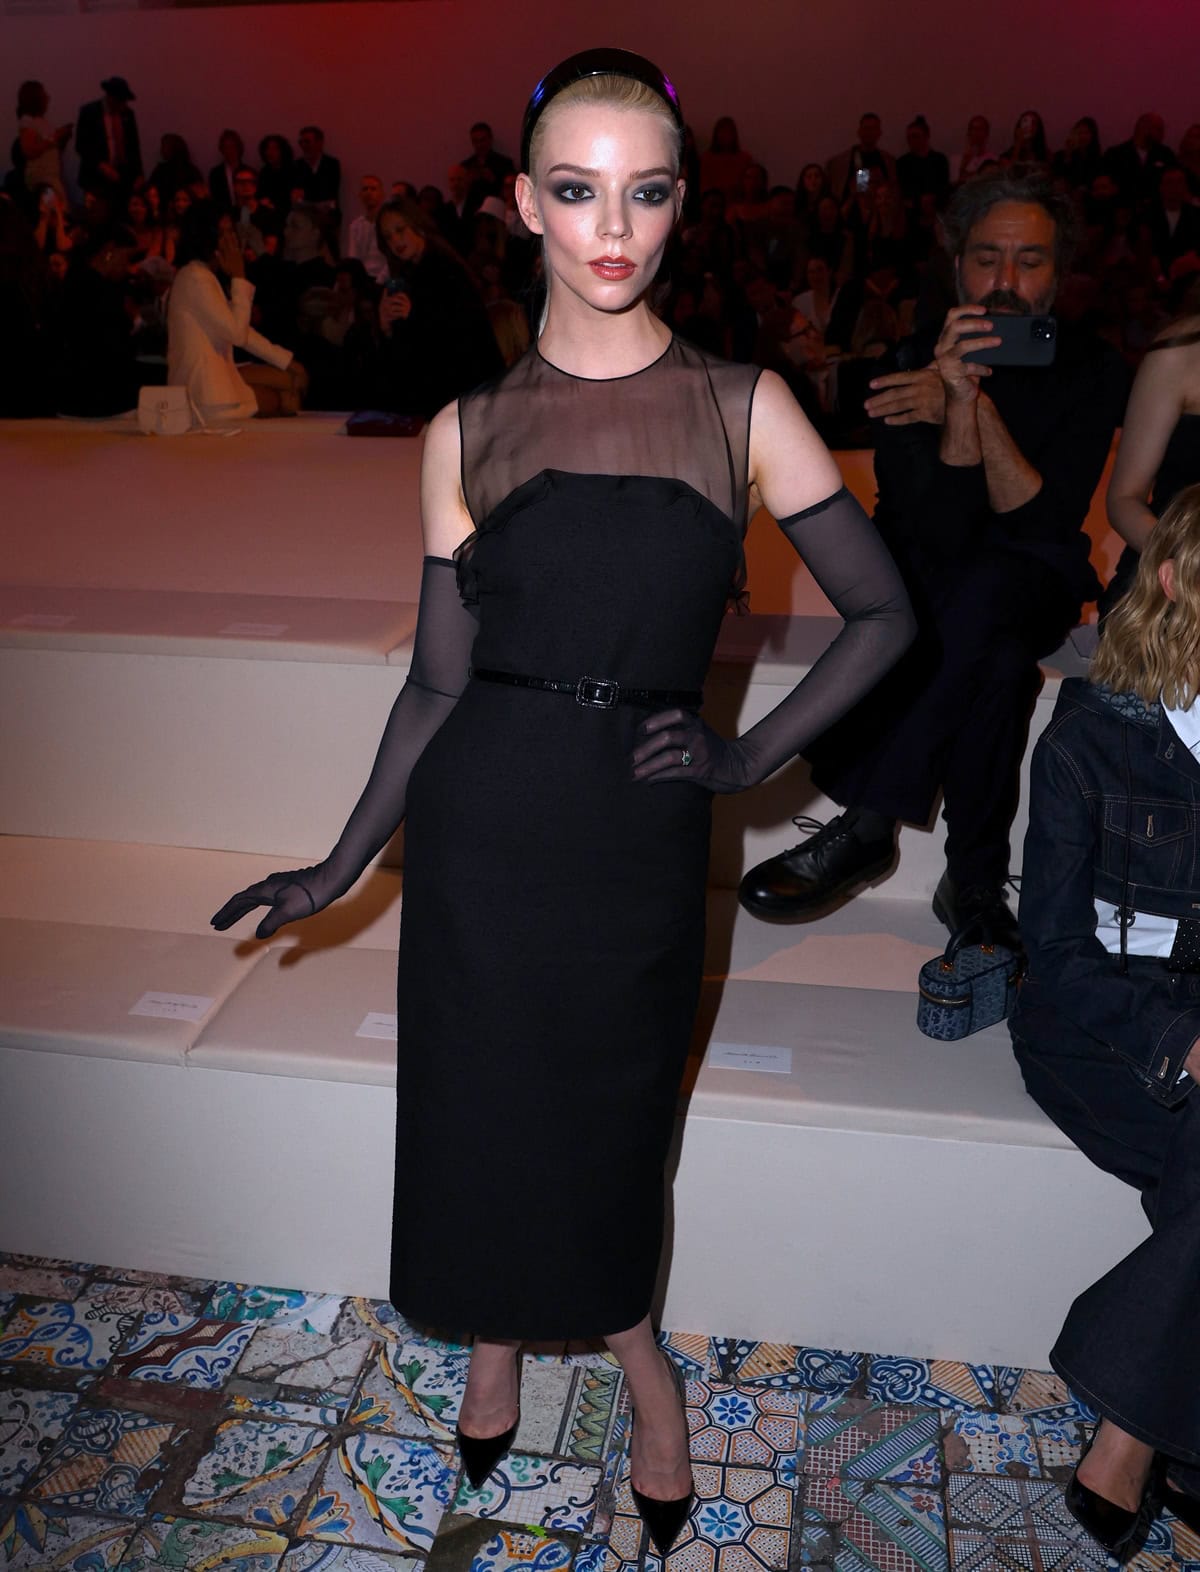 Anya Taylor-Joy attends Christian Dior's Pre-Fall 2024 runway show in a stunning black semi-sheer midi dress by Maria Grazia Chiuri, featuring a sleeveless silhouette and delicate frills at the strapless neckline, exemplifying timeless elegance at the Brooklyn Museum event